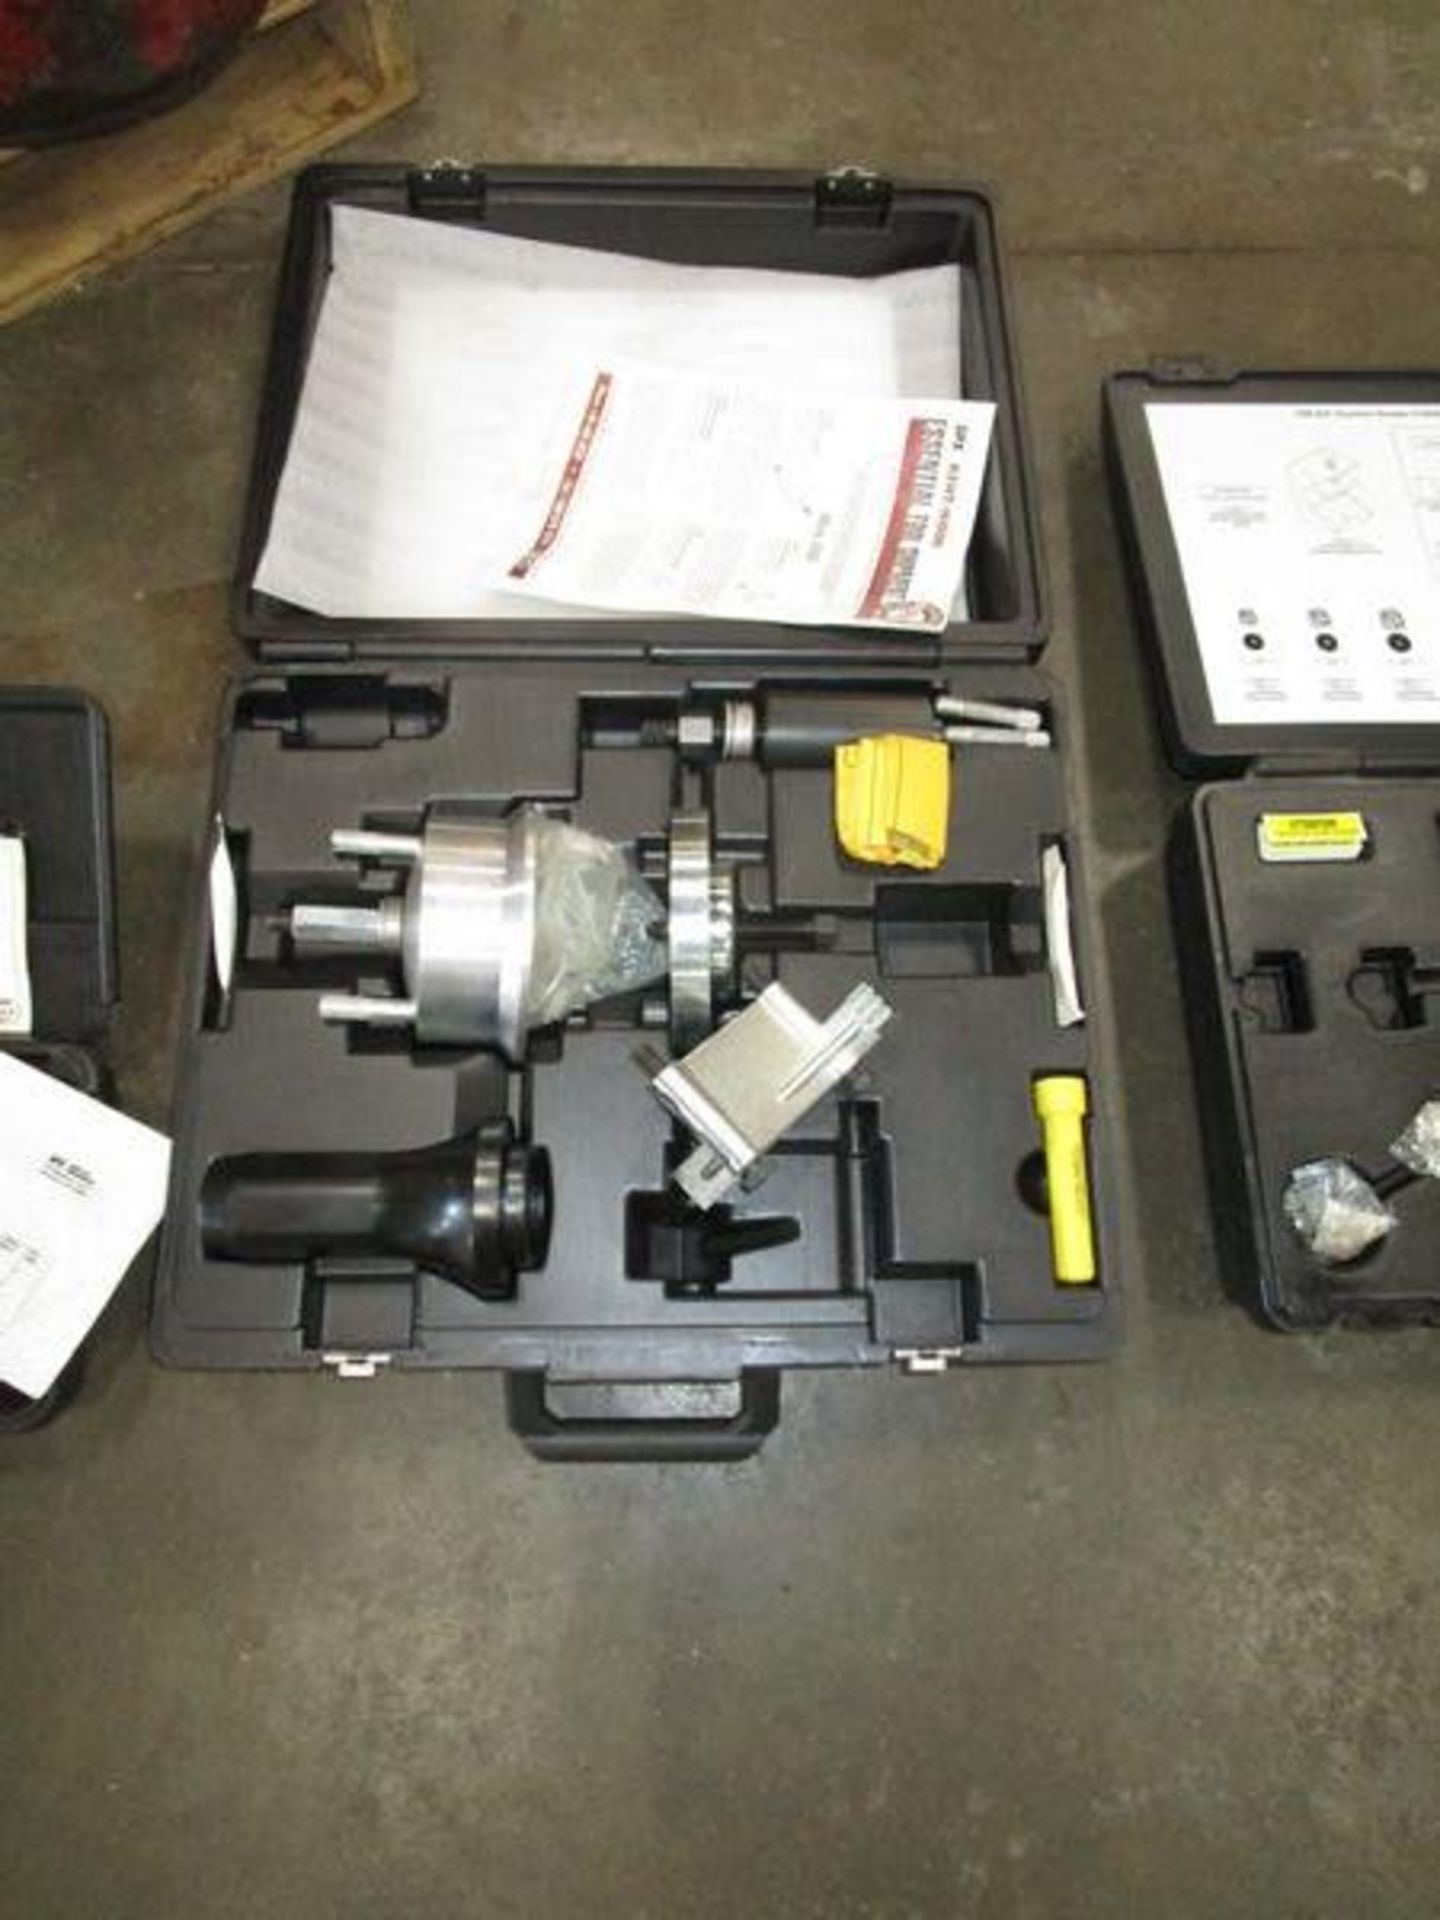 LOT SPX CH-48027 Digital Remote, Kent-Moore SPX Engine Tool, Kent-Moore J-44551 Suction Screen - Image 5 of 6